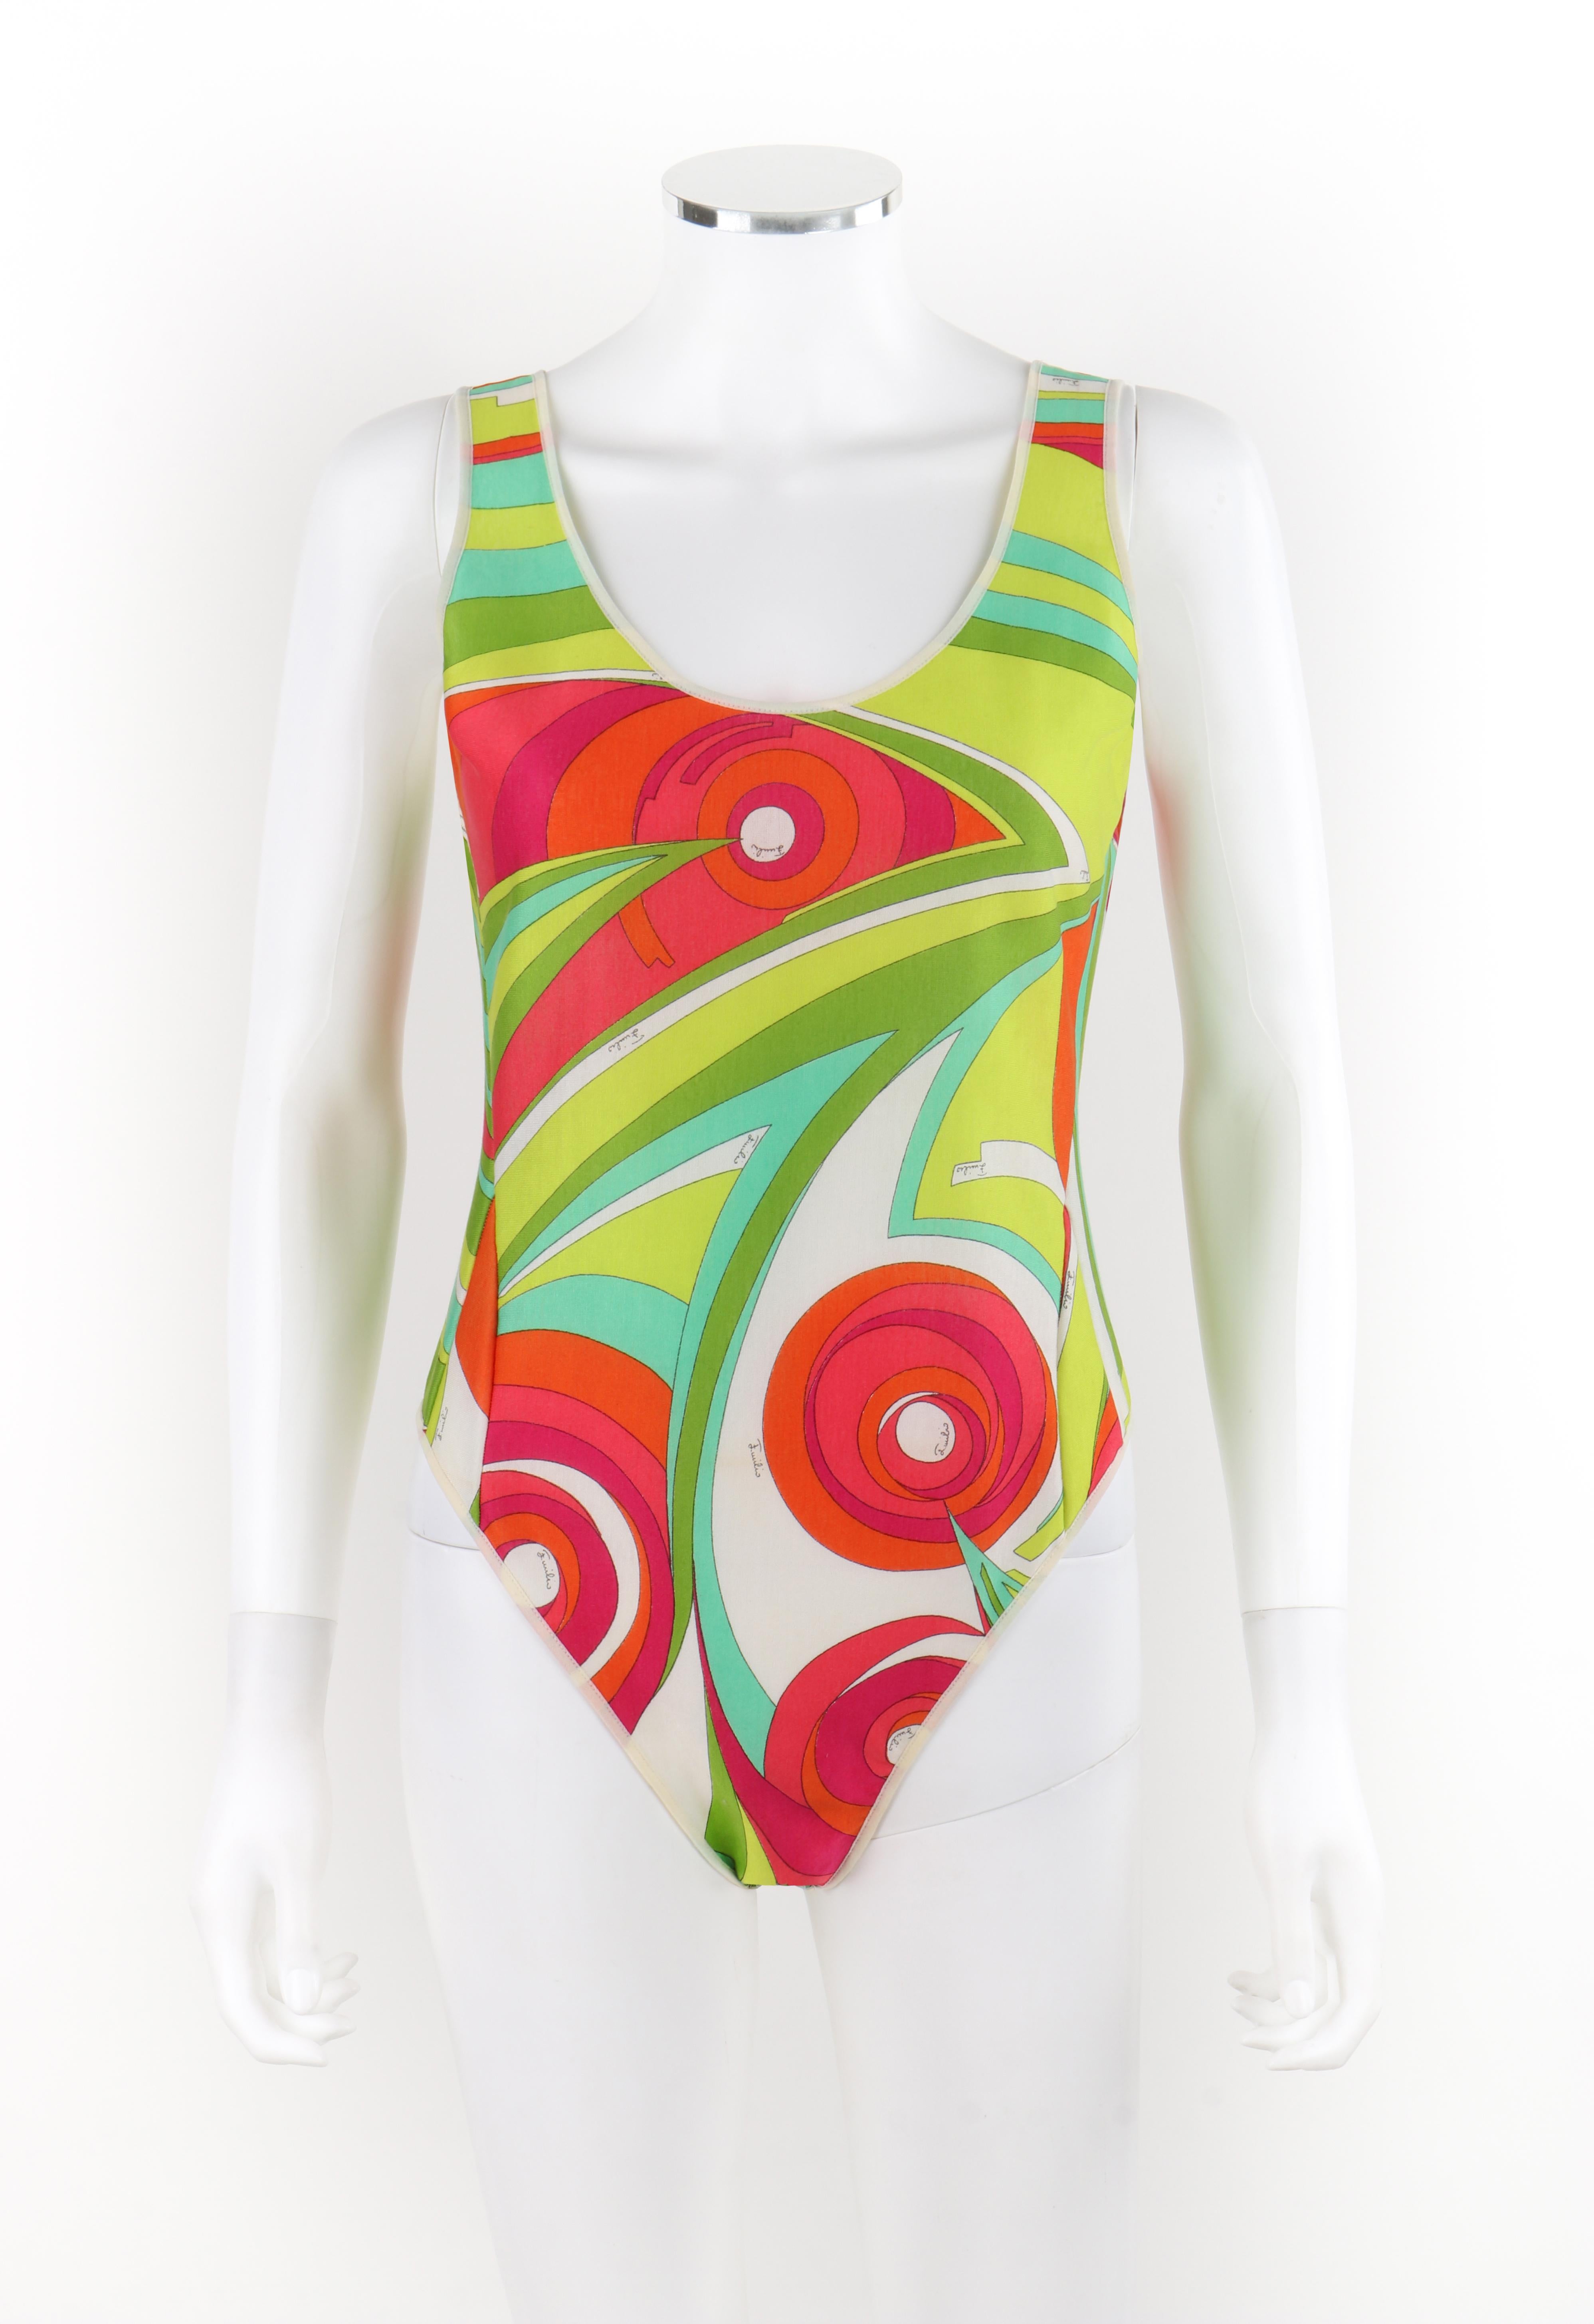 EMILIO PUCCI c.1970s Multicolor Op Art High-Cut One Piece Snap Bodysuit Swimsuit

Brand / Manufacturer: Emilio Pucci
Circa: 1970s
Designer: Emilio Pucci
Style: One-piece Swimsuit
Color(s): Shades of pink, green, orange, white, yellow, blue
Lined: